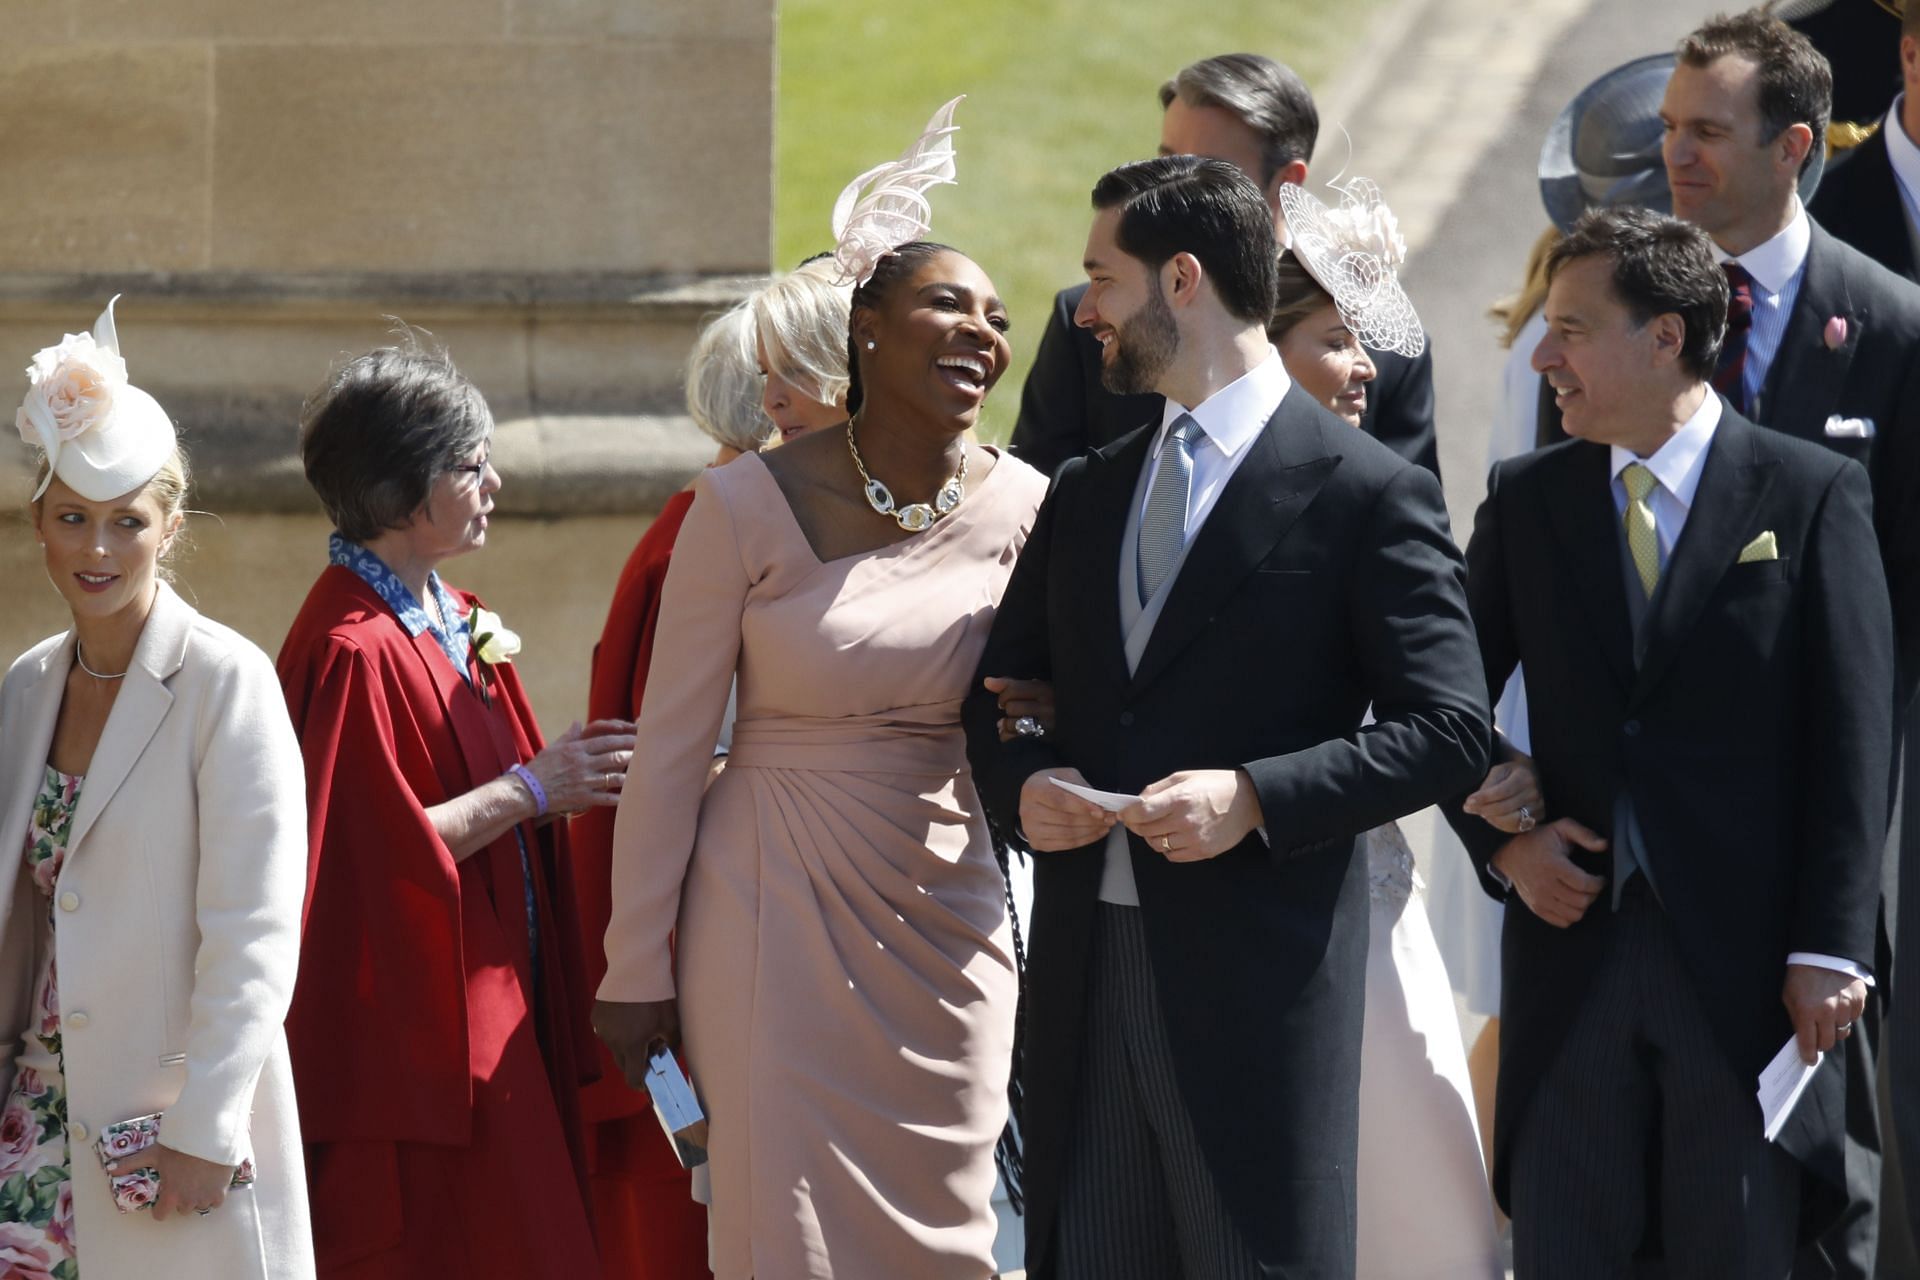 Serena Williams and her husband Alexis Ohanian at the Windsor Castle